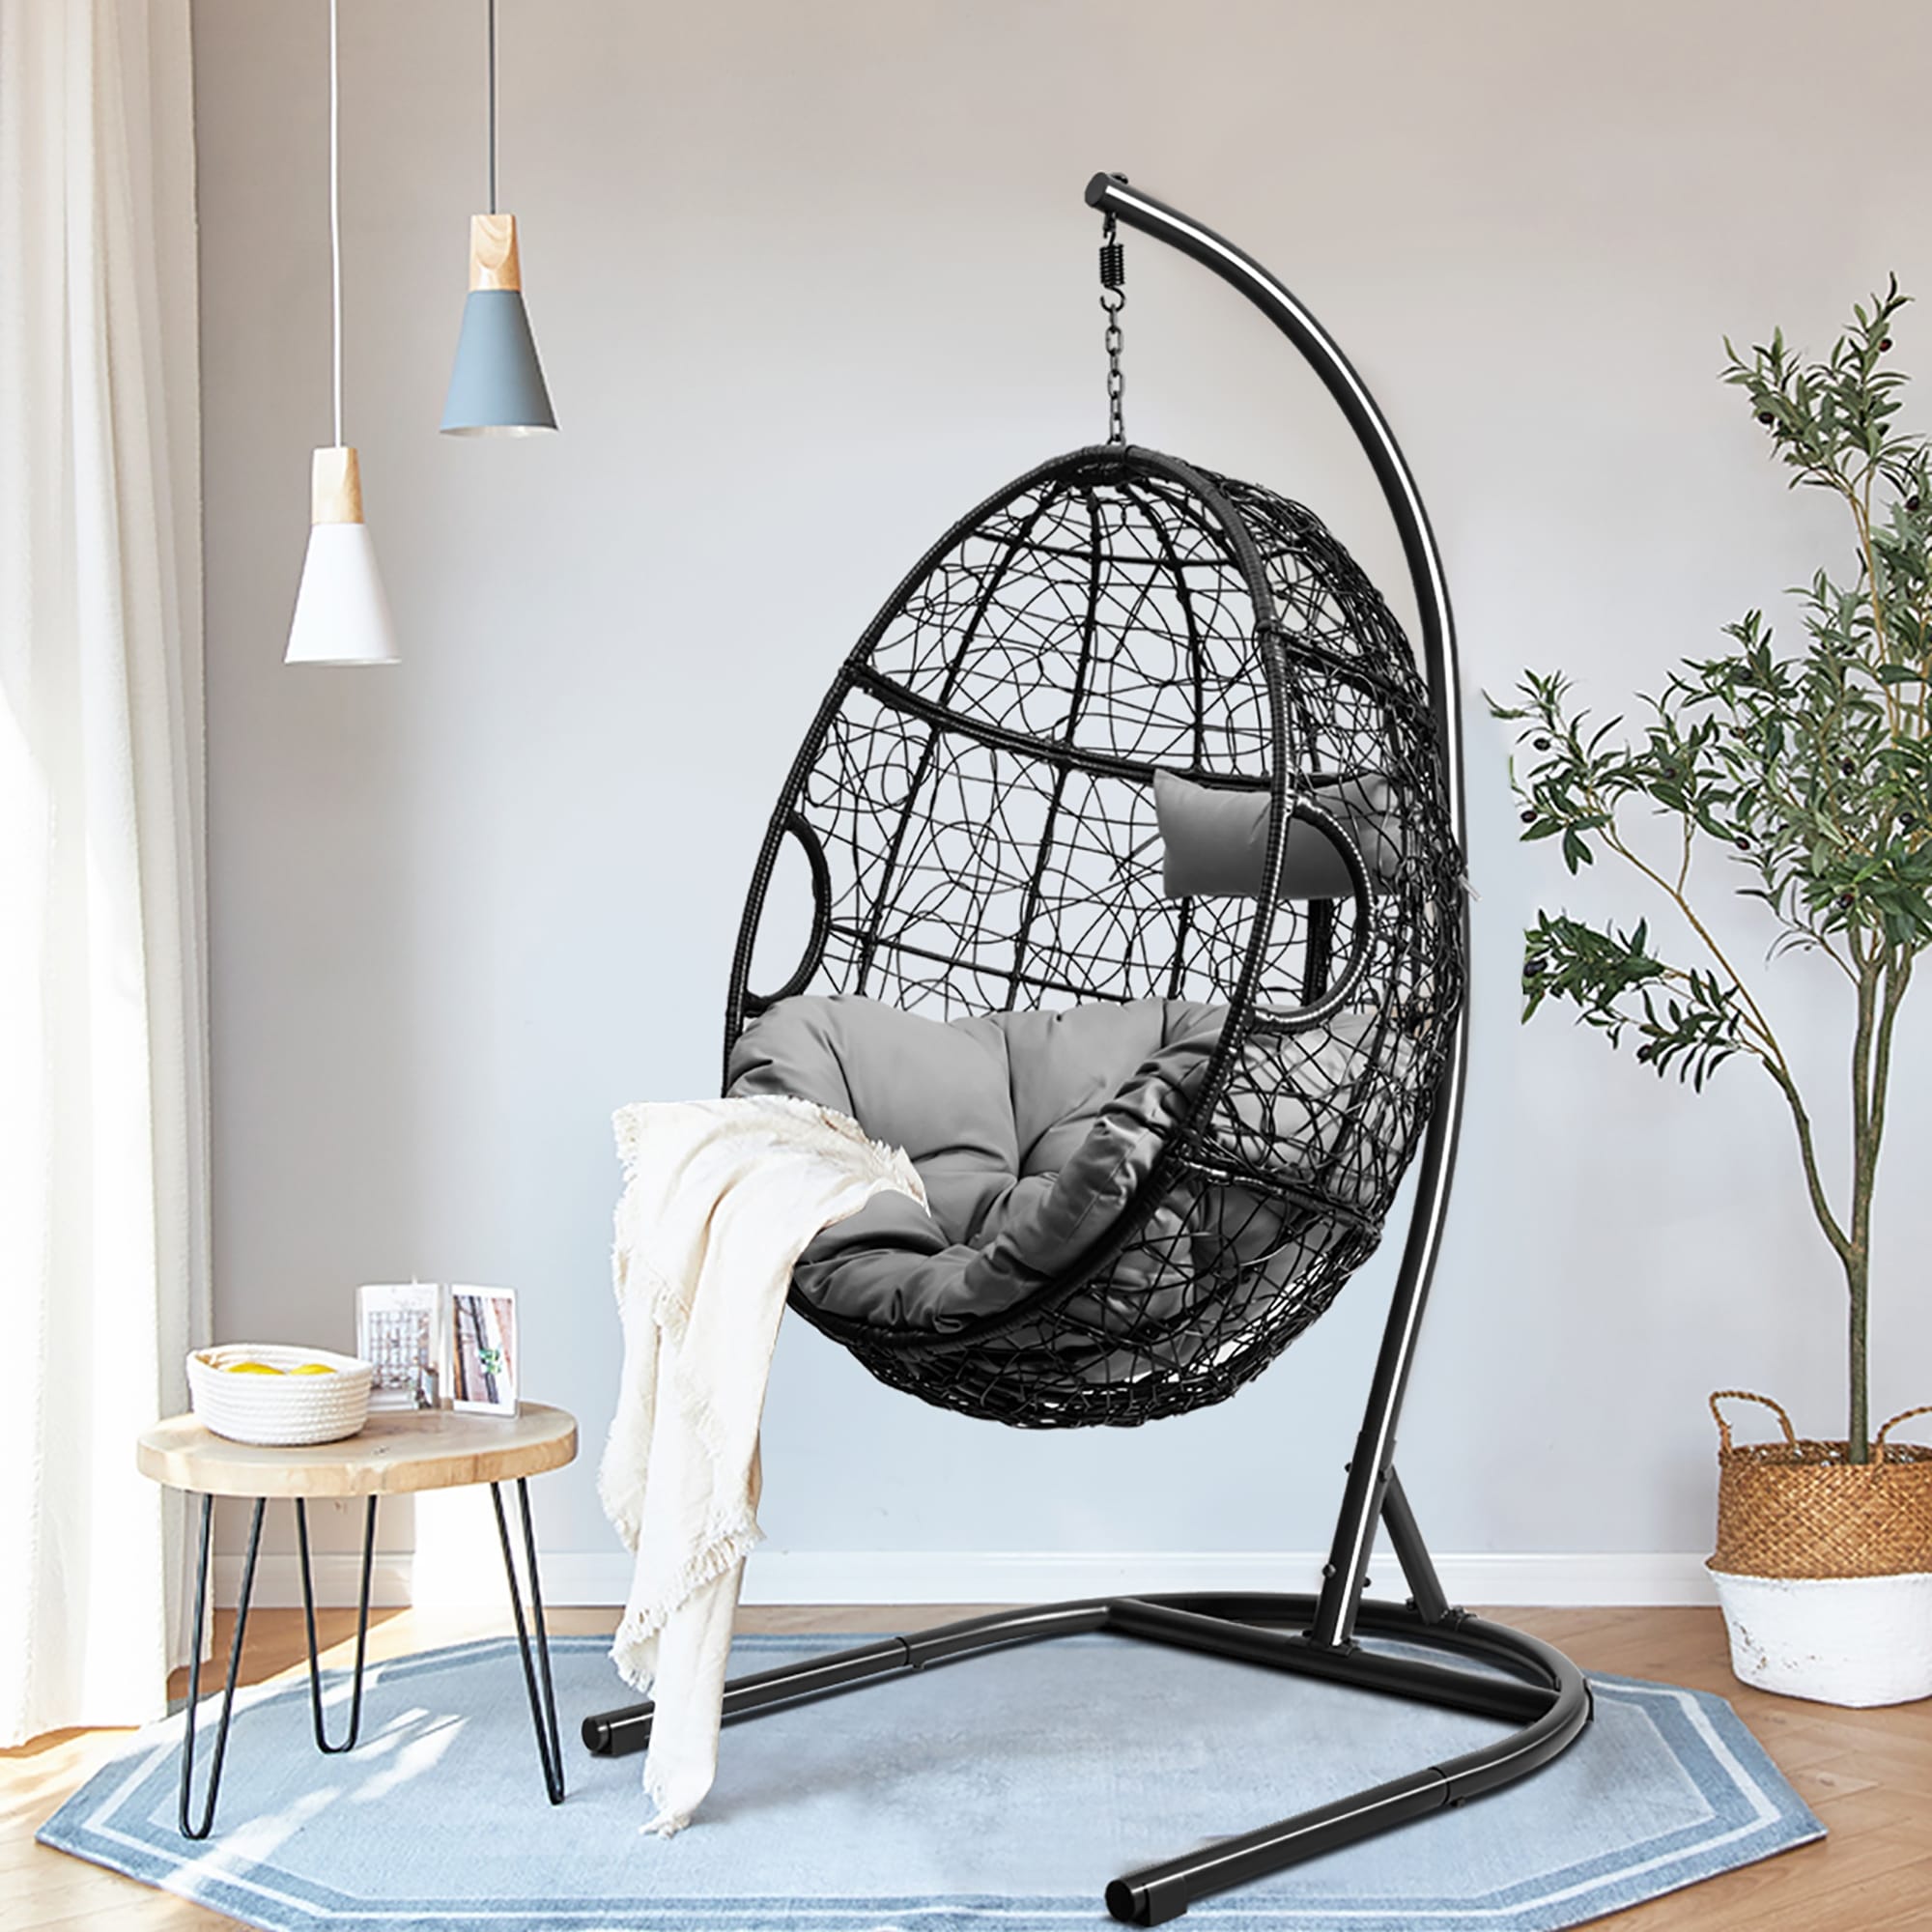 Beige Cotton Rope Hanging Air/ Sky Chair Swing - On Sale - Bed Bath &  Beyond - 14780982